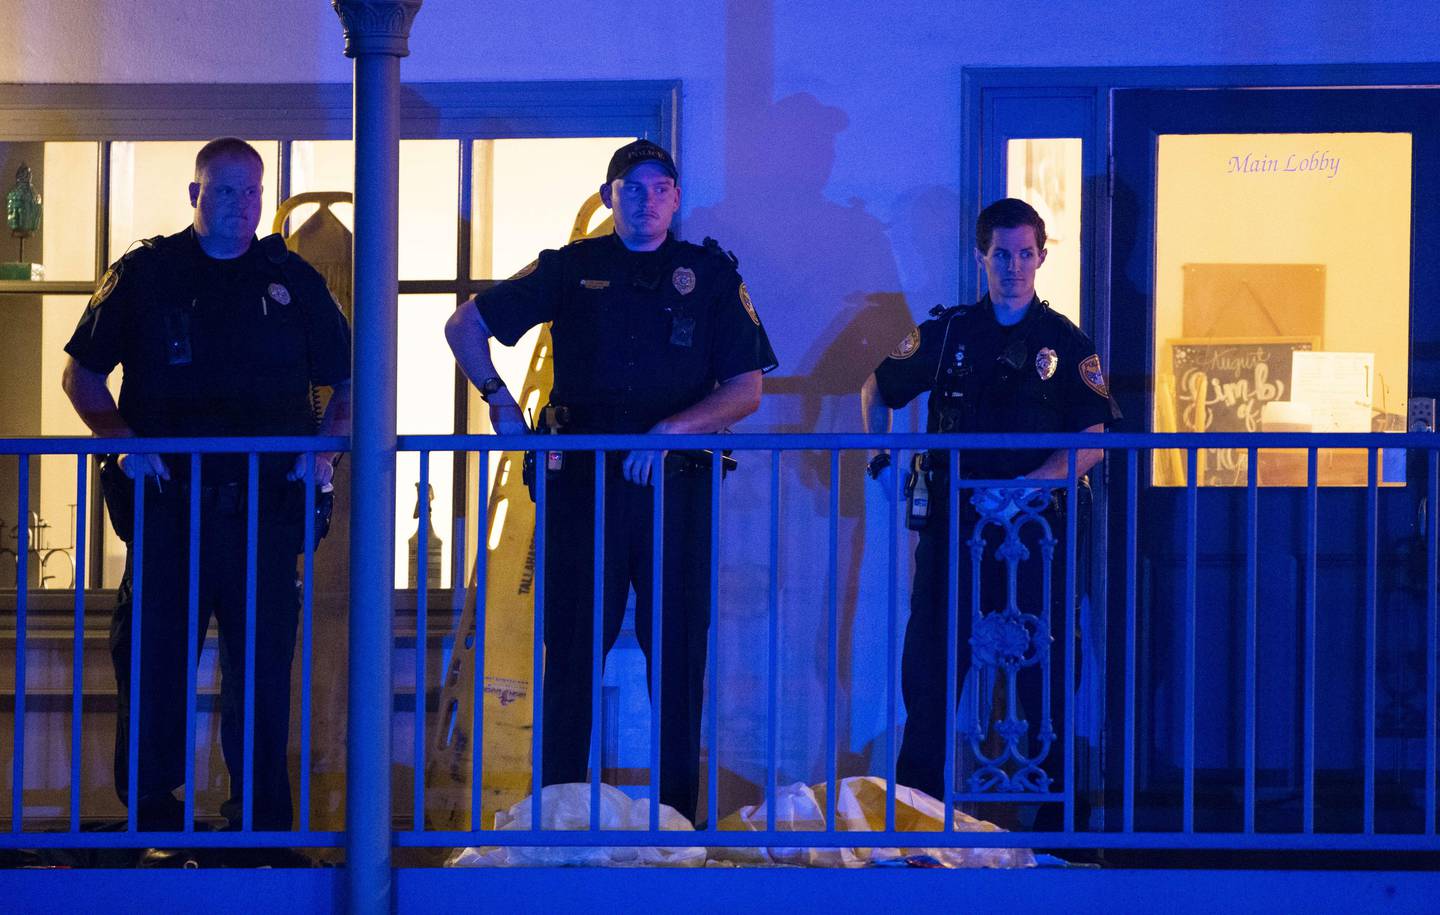 TALLAHASSEE, FL - NOVEMBER 02: Tallahassee Police officers are stationed outside the HotYoga Studio after a gunman killed one person and injured several others inside on November 2, 2018 in Tallahassee, Florida. The gunman also died from what appears a self inflicted gunshot wound according to police.   Mark Wallheiser/Getty Images/AFP
== FOR NEWSPAPERS, INTERNET, TELCOS & TELEVISION USE ONLY ==